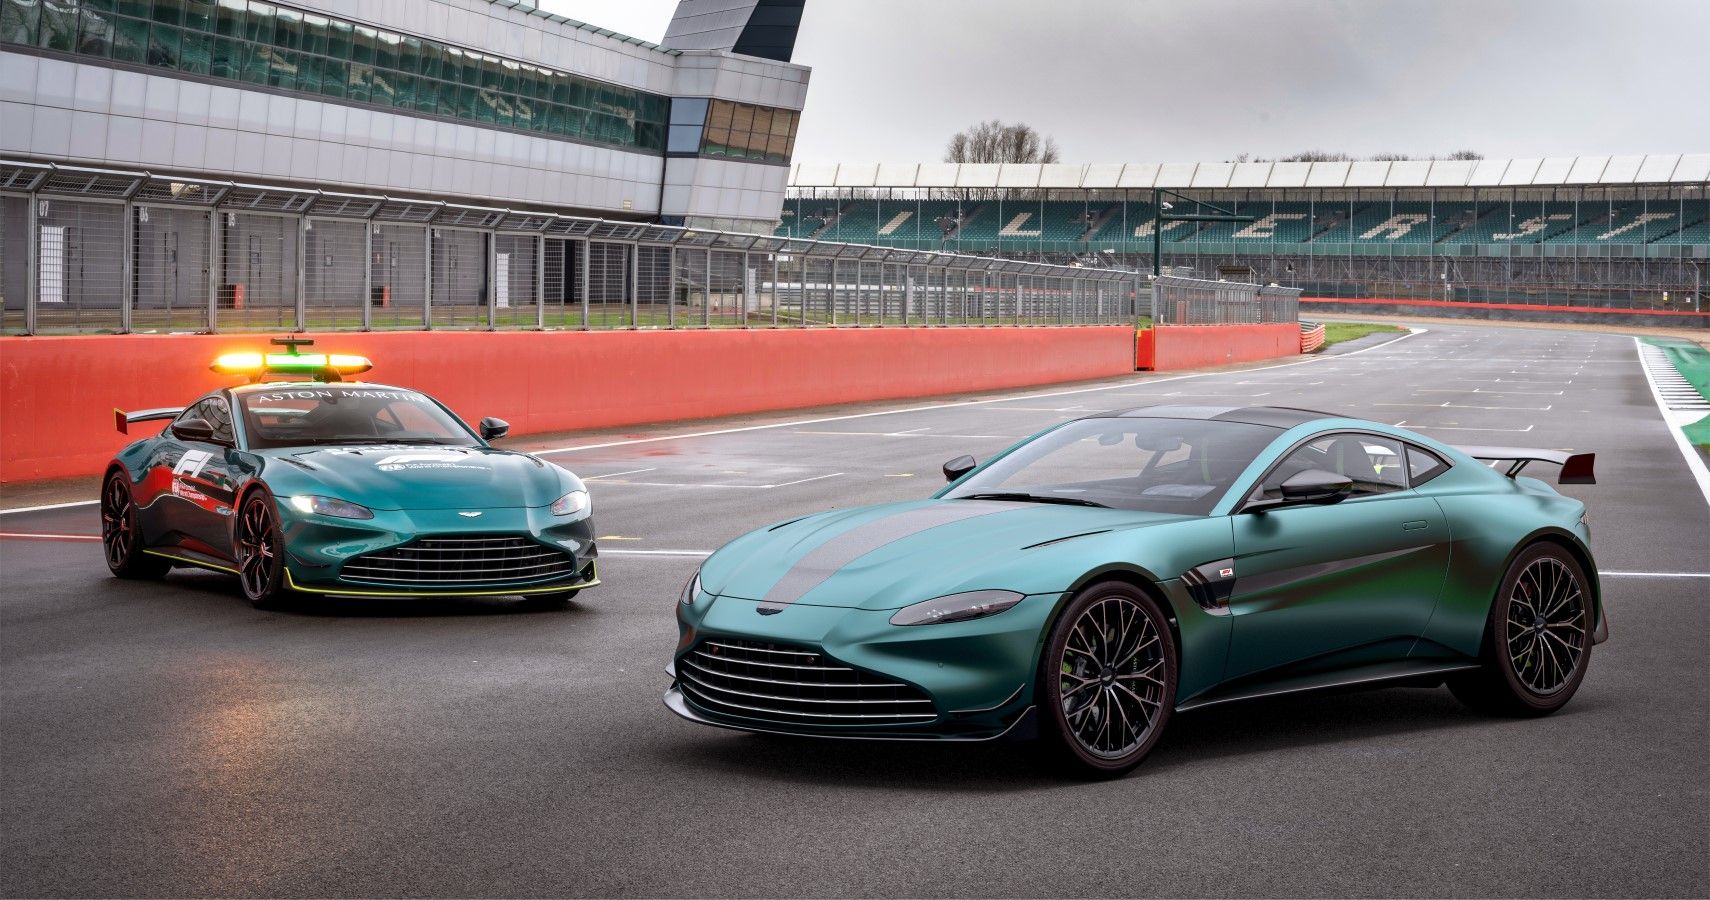 2022 Aston Martin Vantage F1 Edition with the F1 safety car